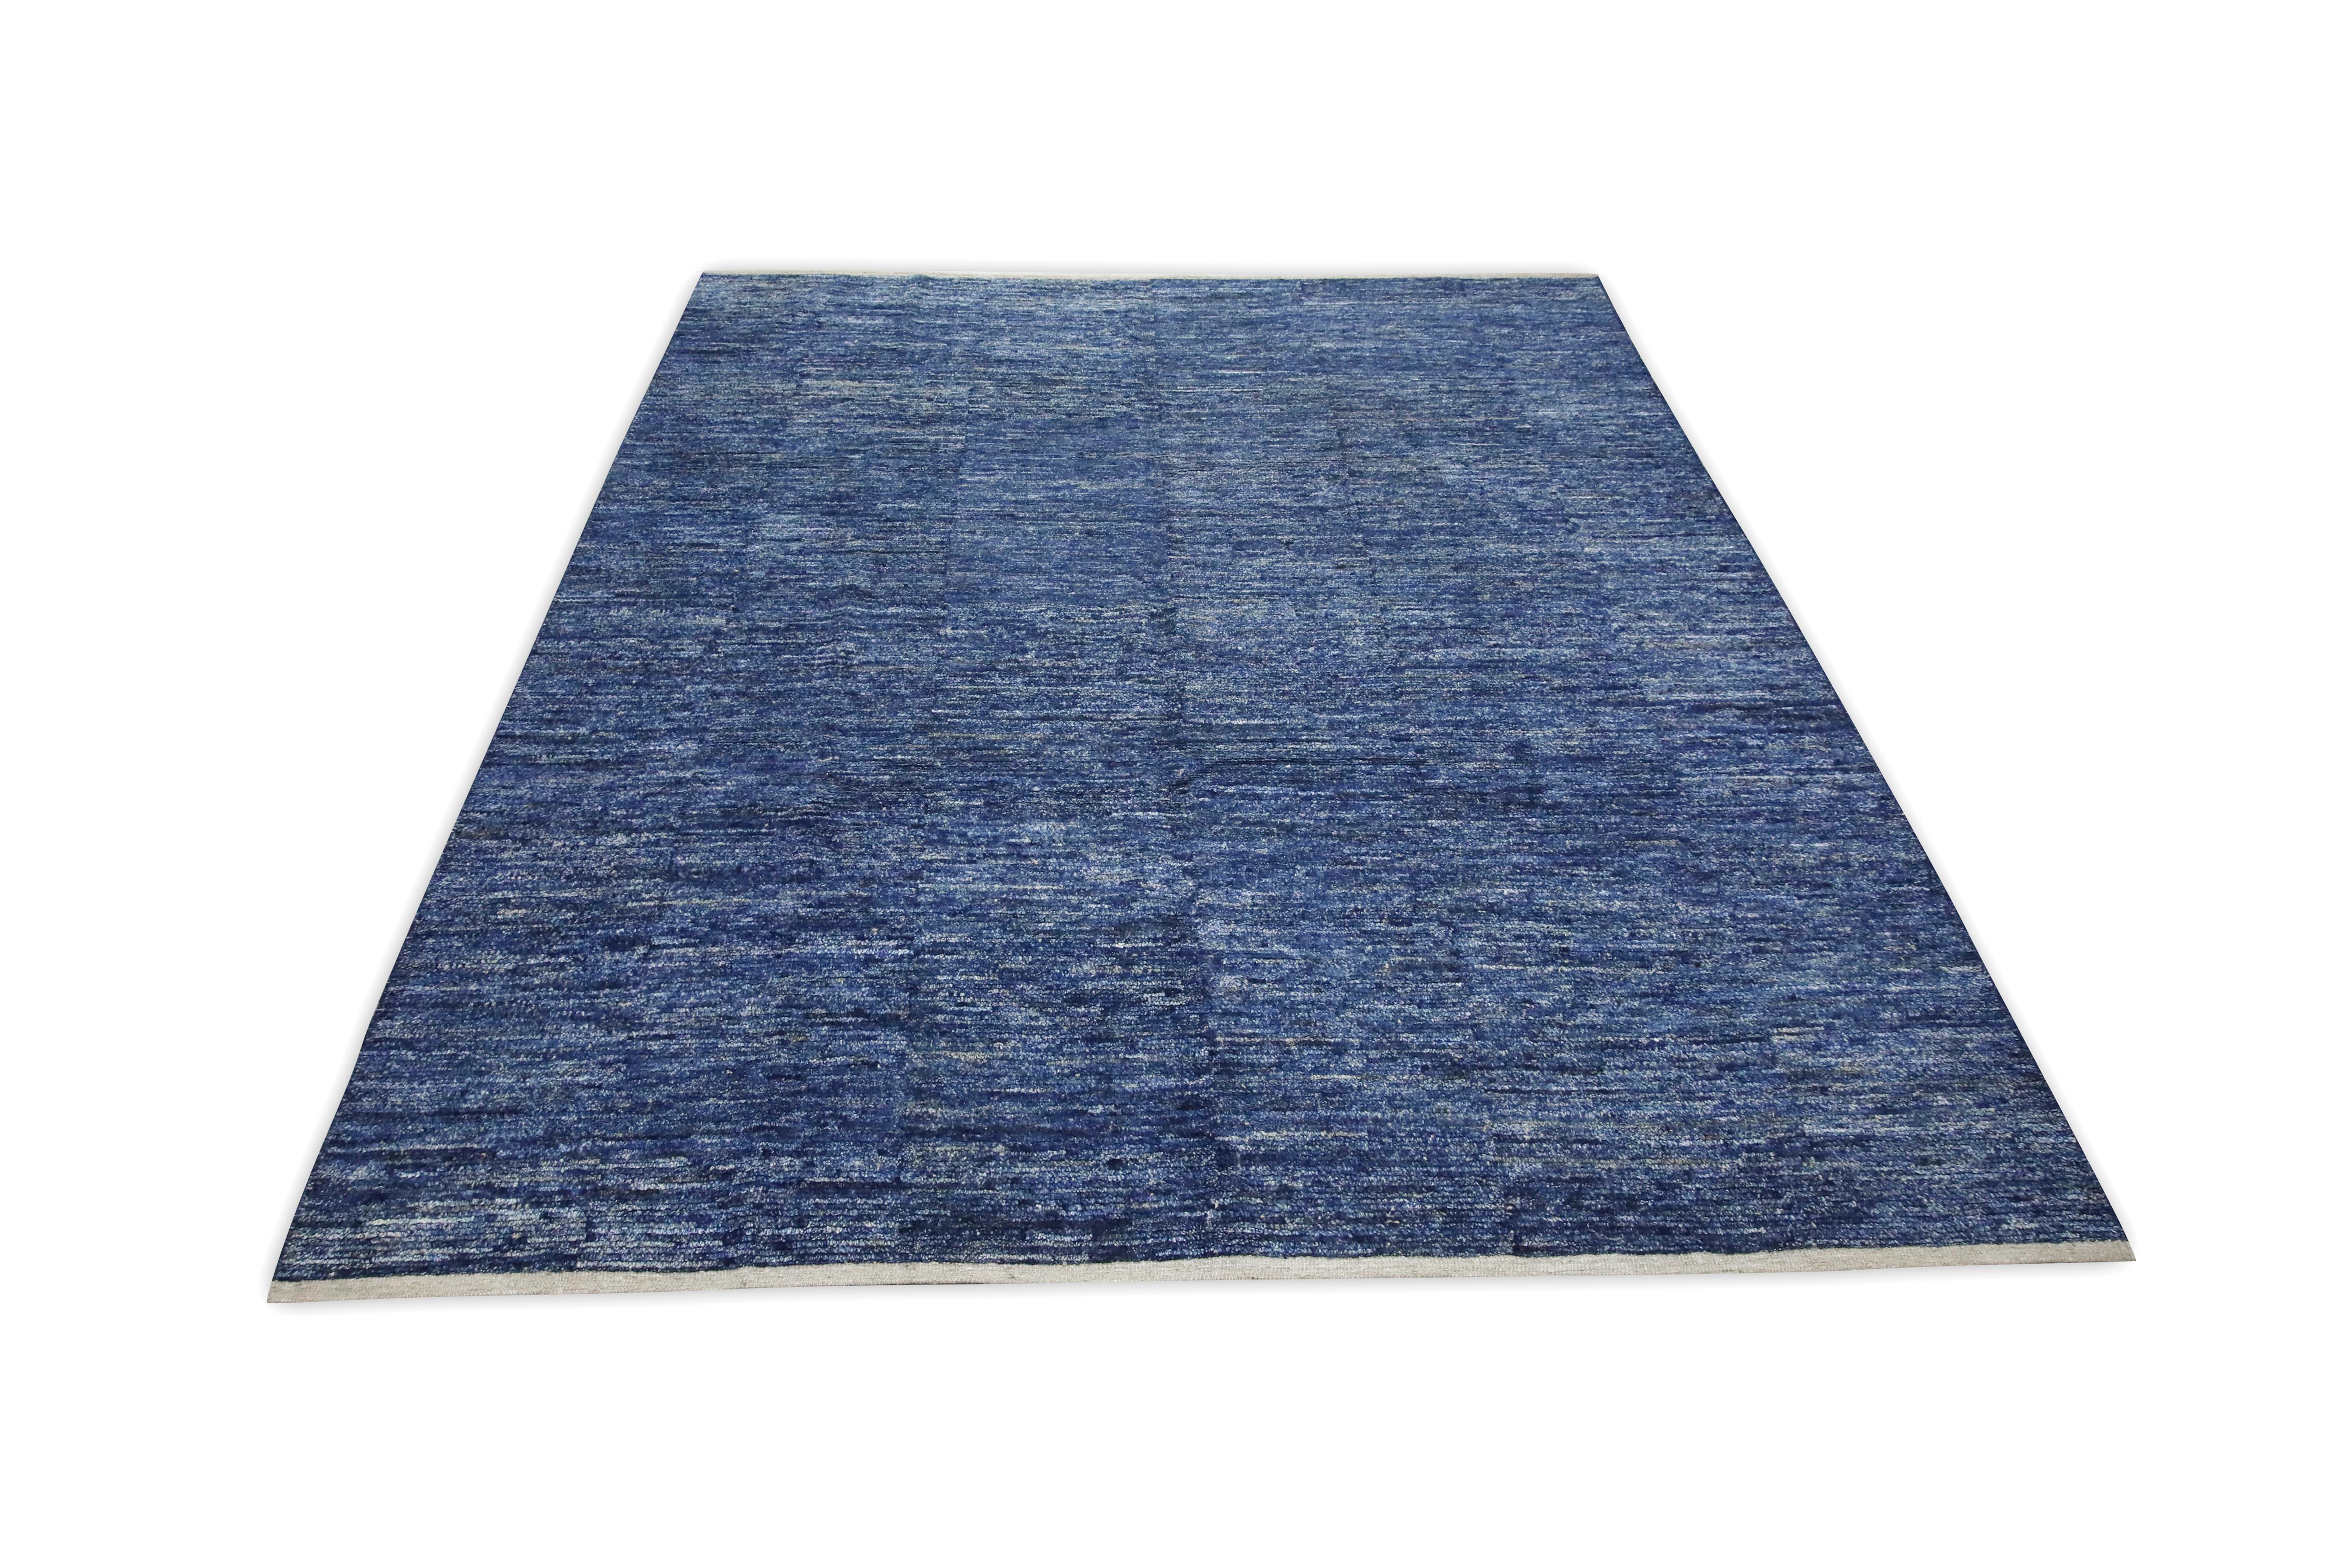 Contemporary 21st Century Modern Moroccan Style Wool Rug in Blue Design 9'5